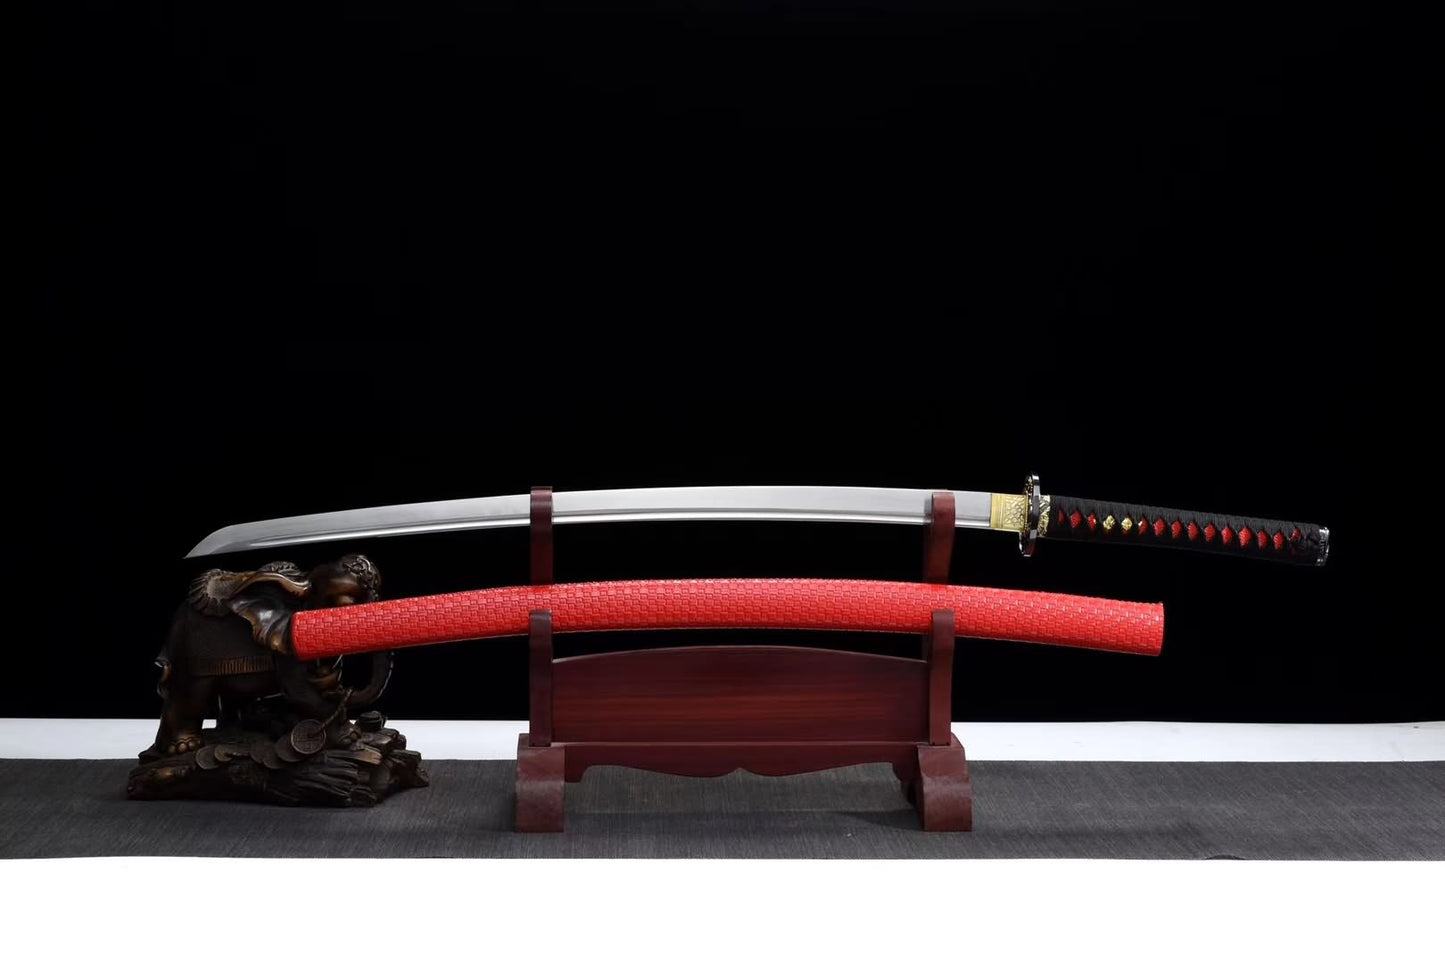 Red samurai sword,High carbon steel blade,Leather scabbard - Chinese sword shop